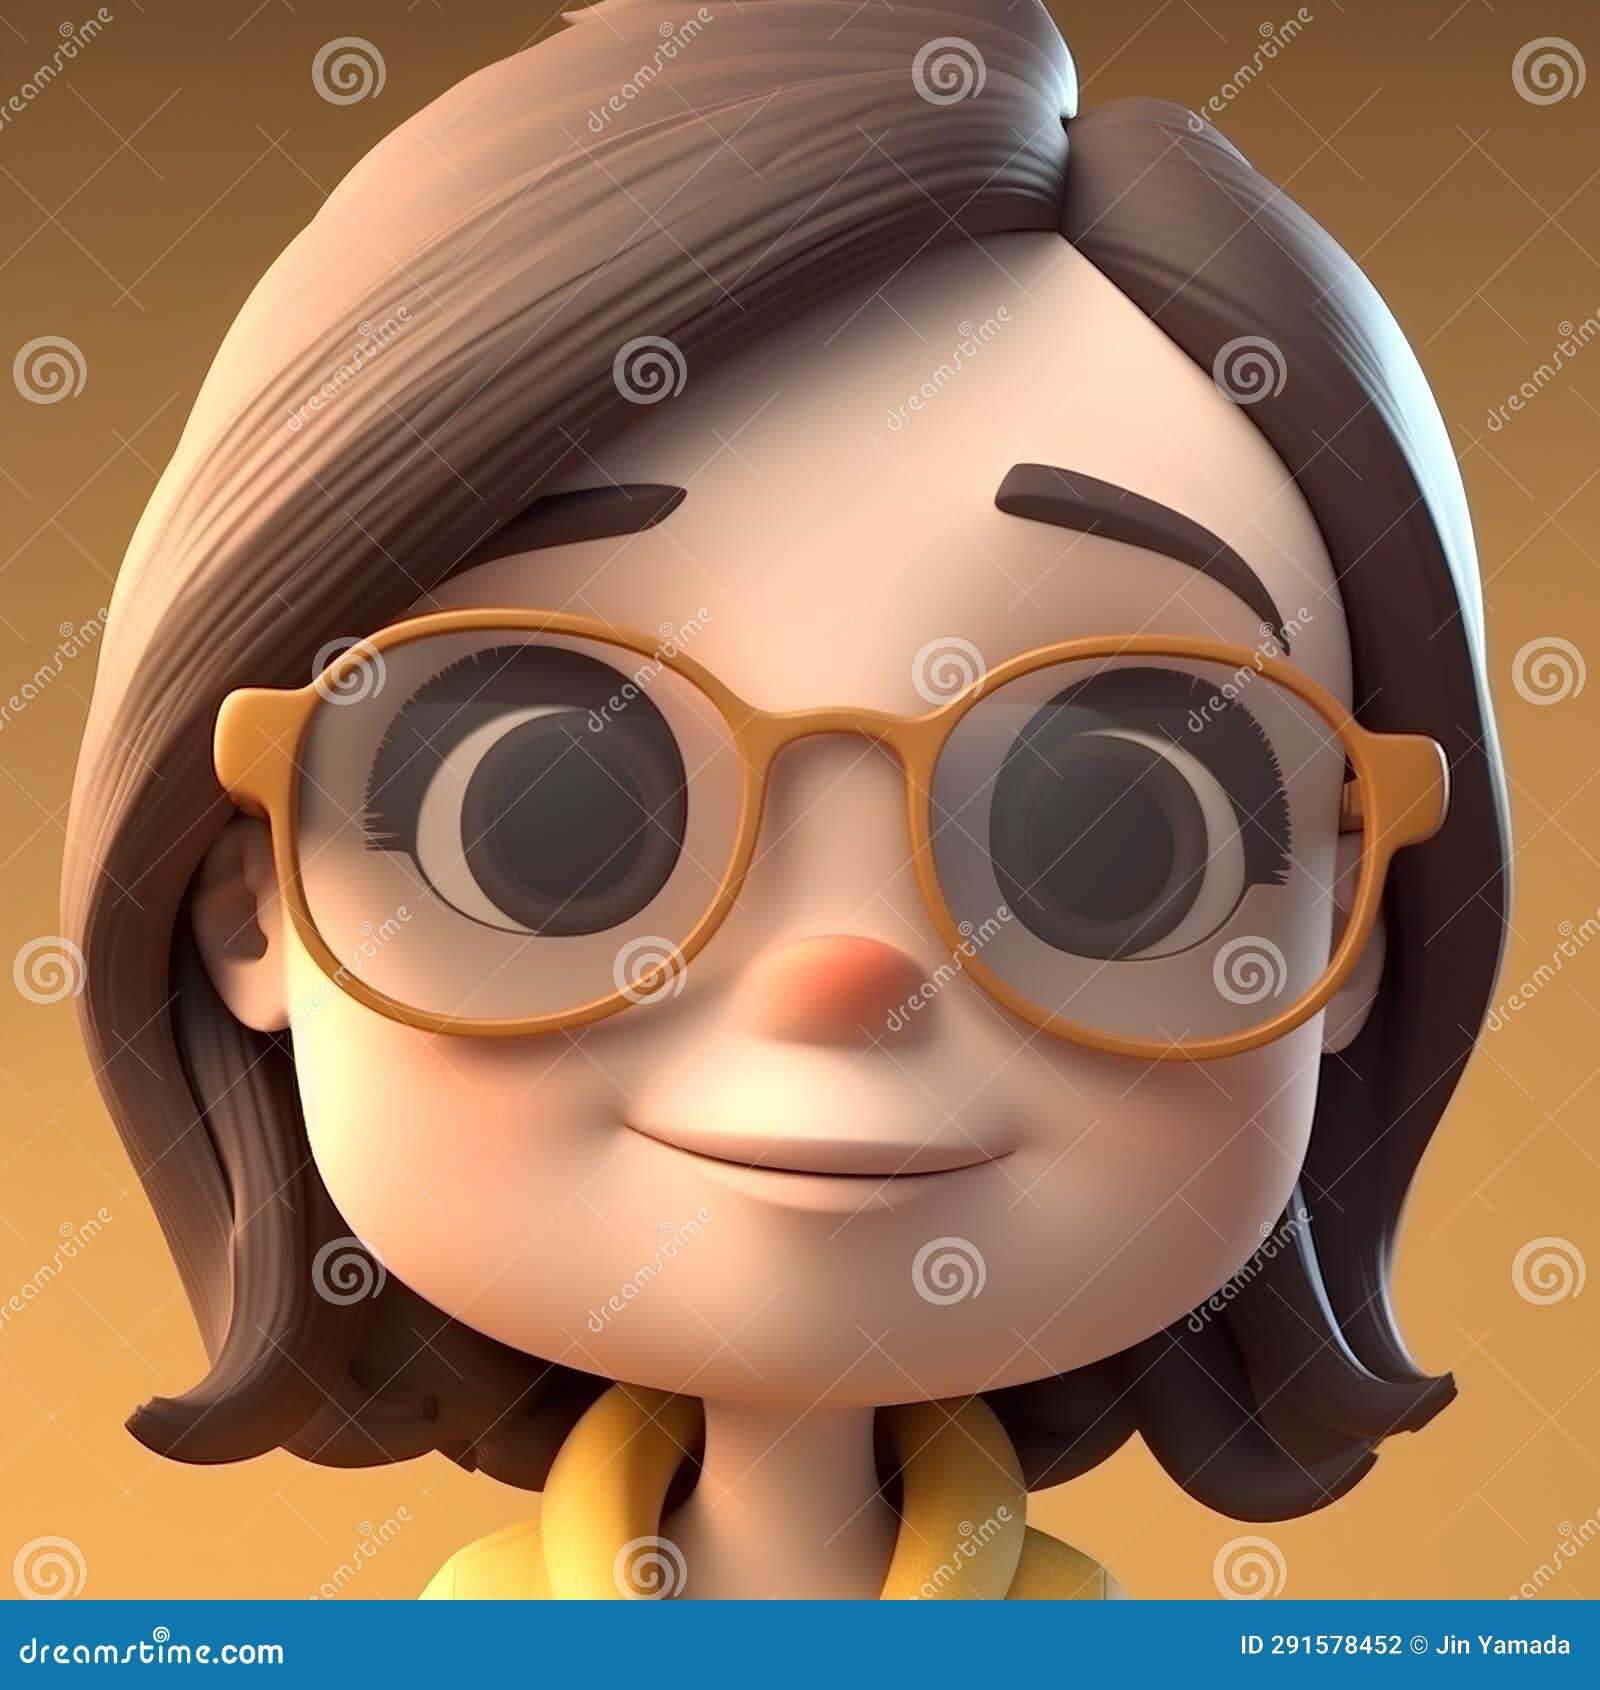 cute cartoon girl with glasses - 3d rendered 